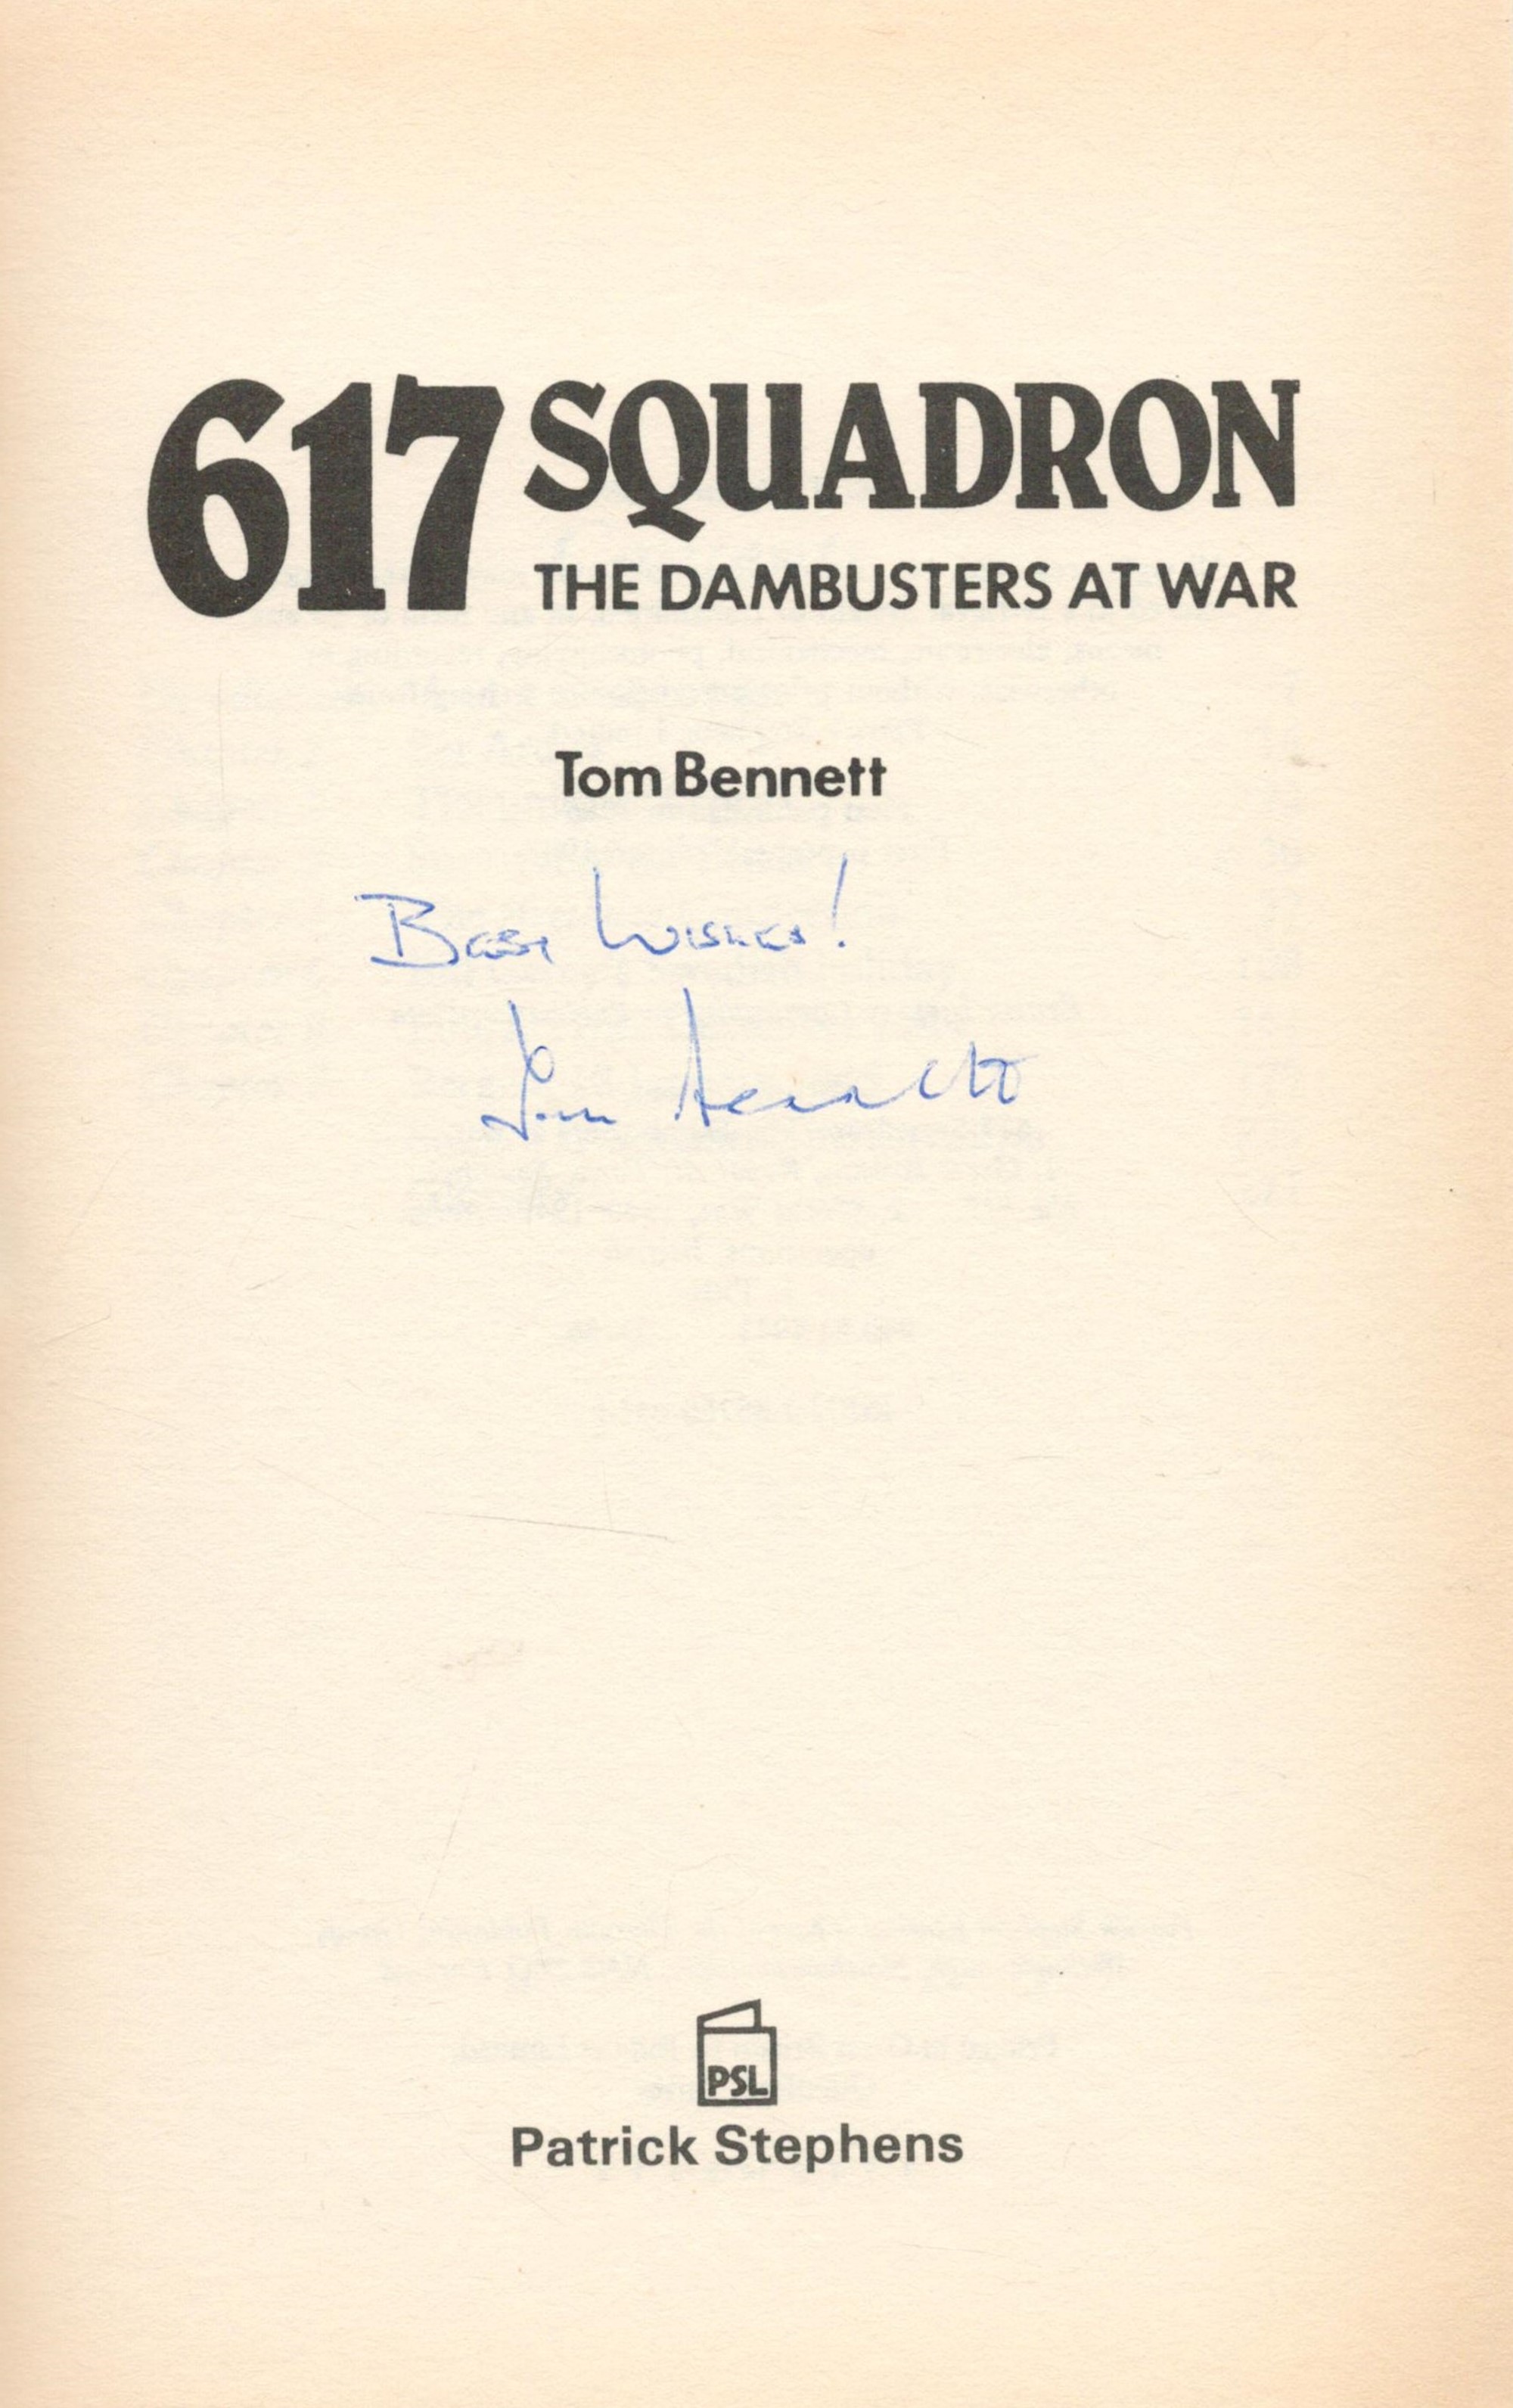 WW2 AVM Tom Bennett Signed 617 Squadron Dambusters at War by AVM Tom Bennett. Paperback Book With - Image 2 of 3